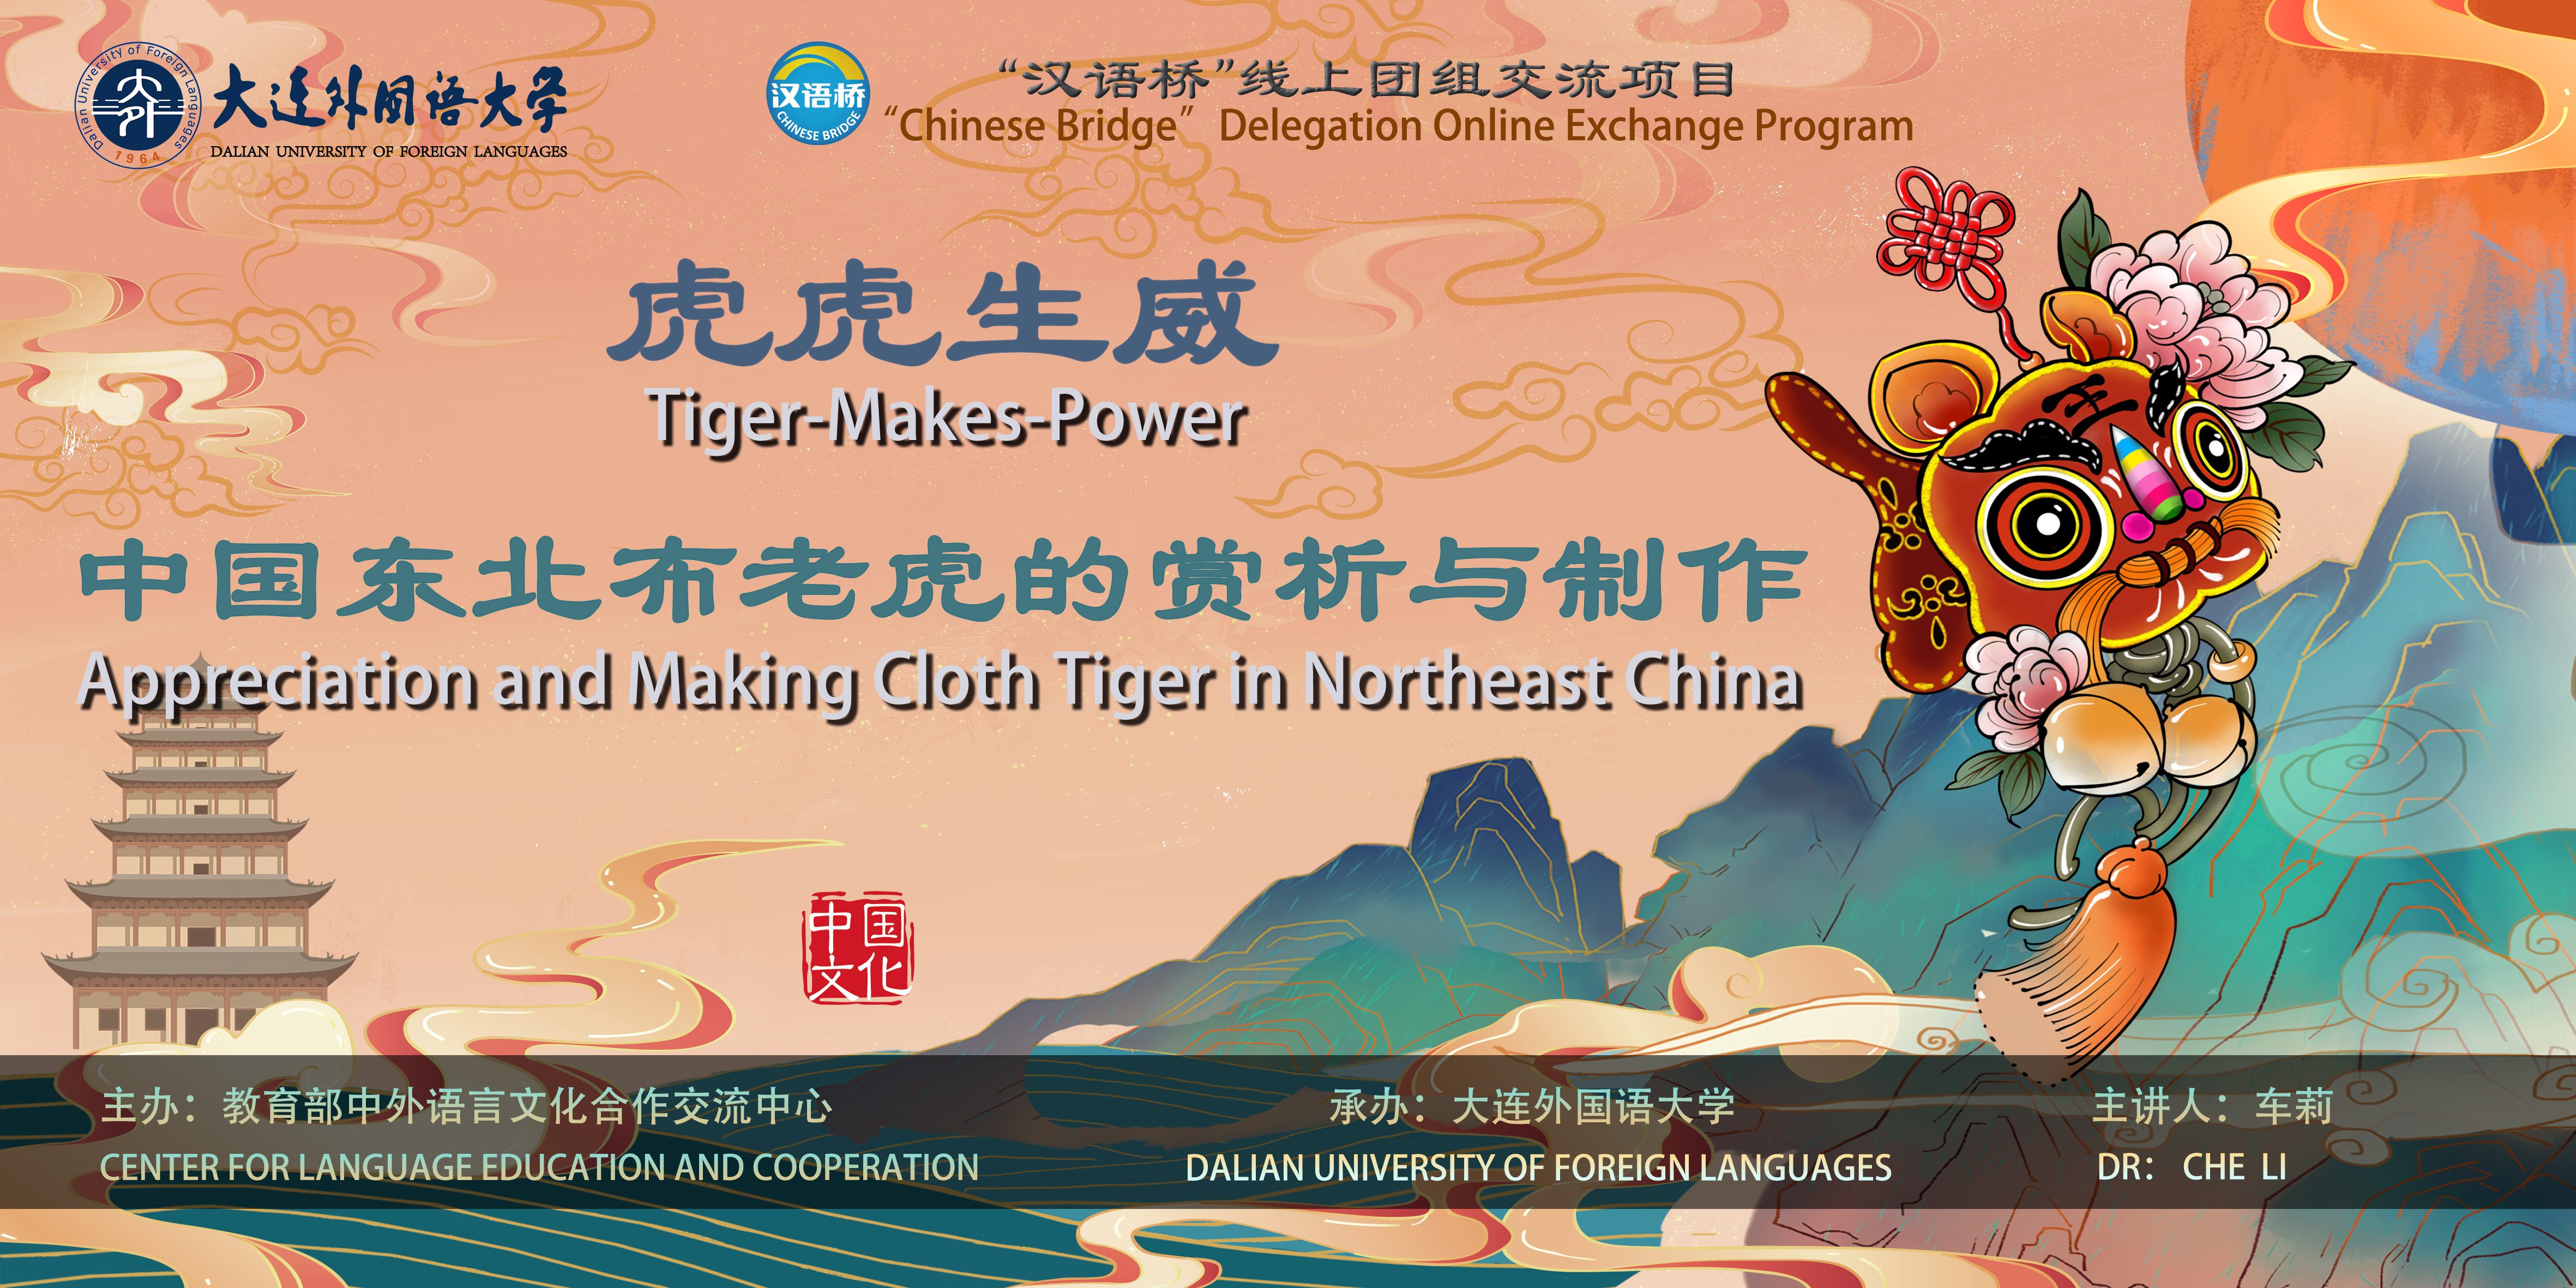 Tiger-Makes-Power: Appreciation and Making Cloth Tiger in Northeast China